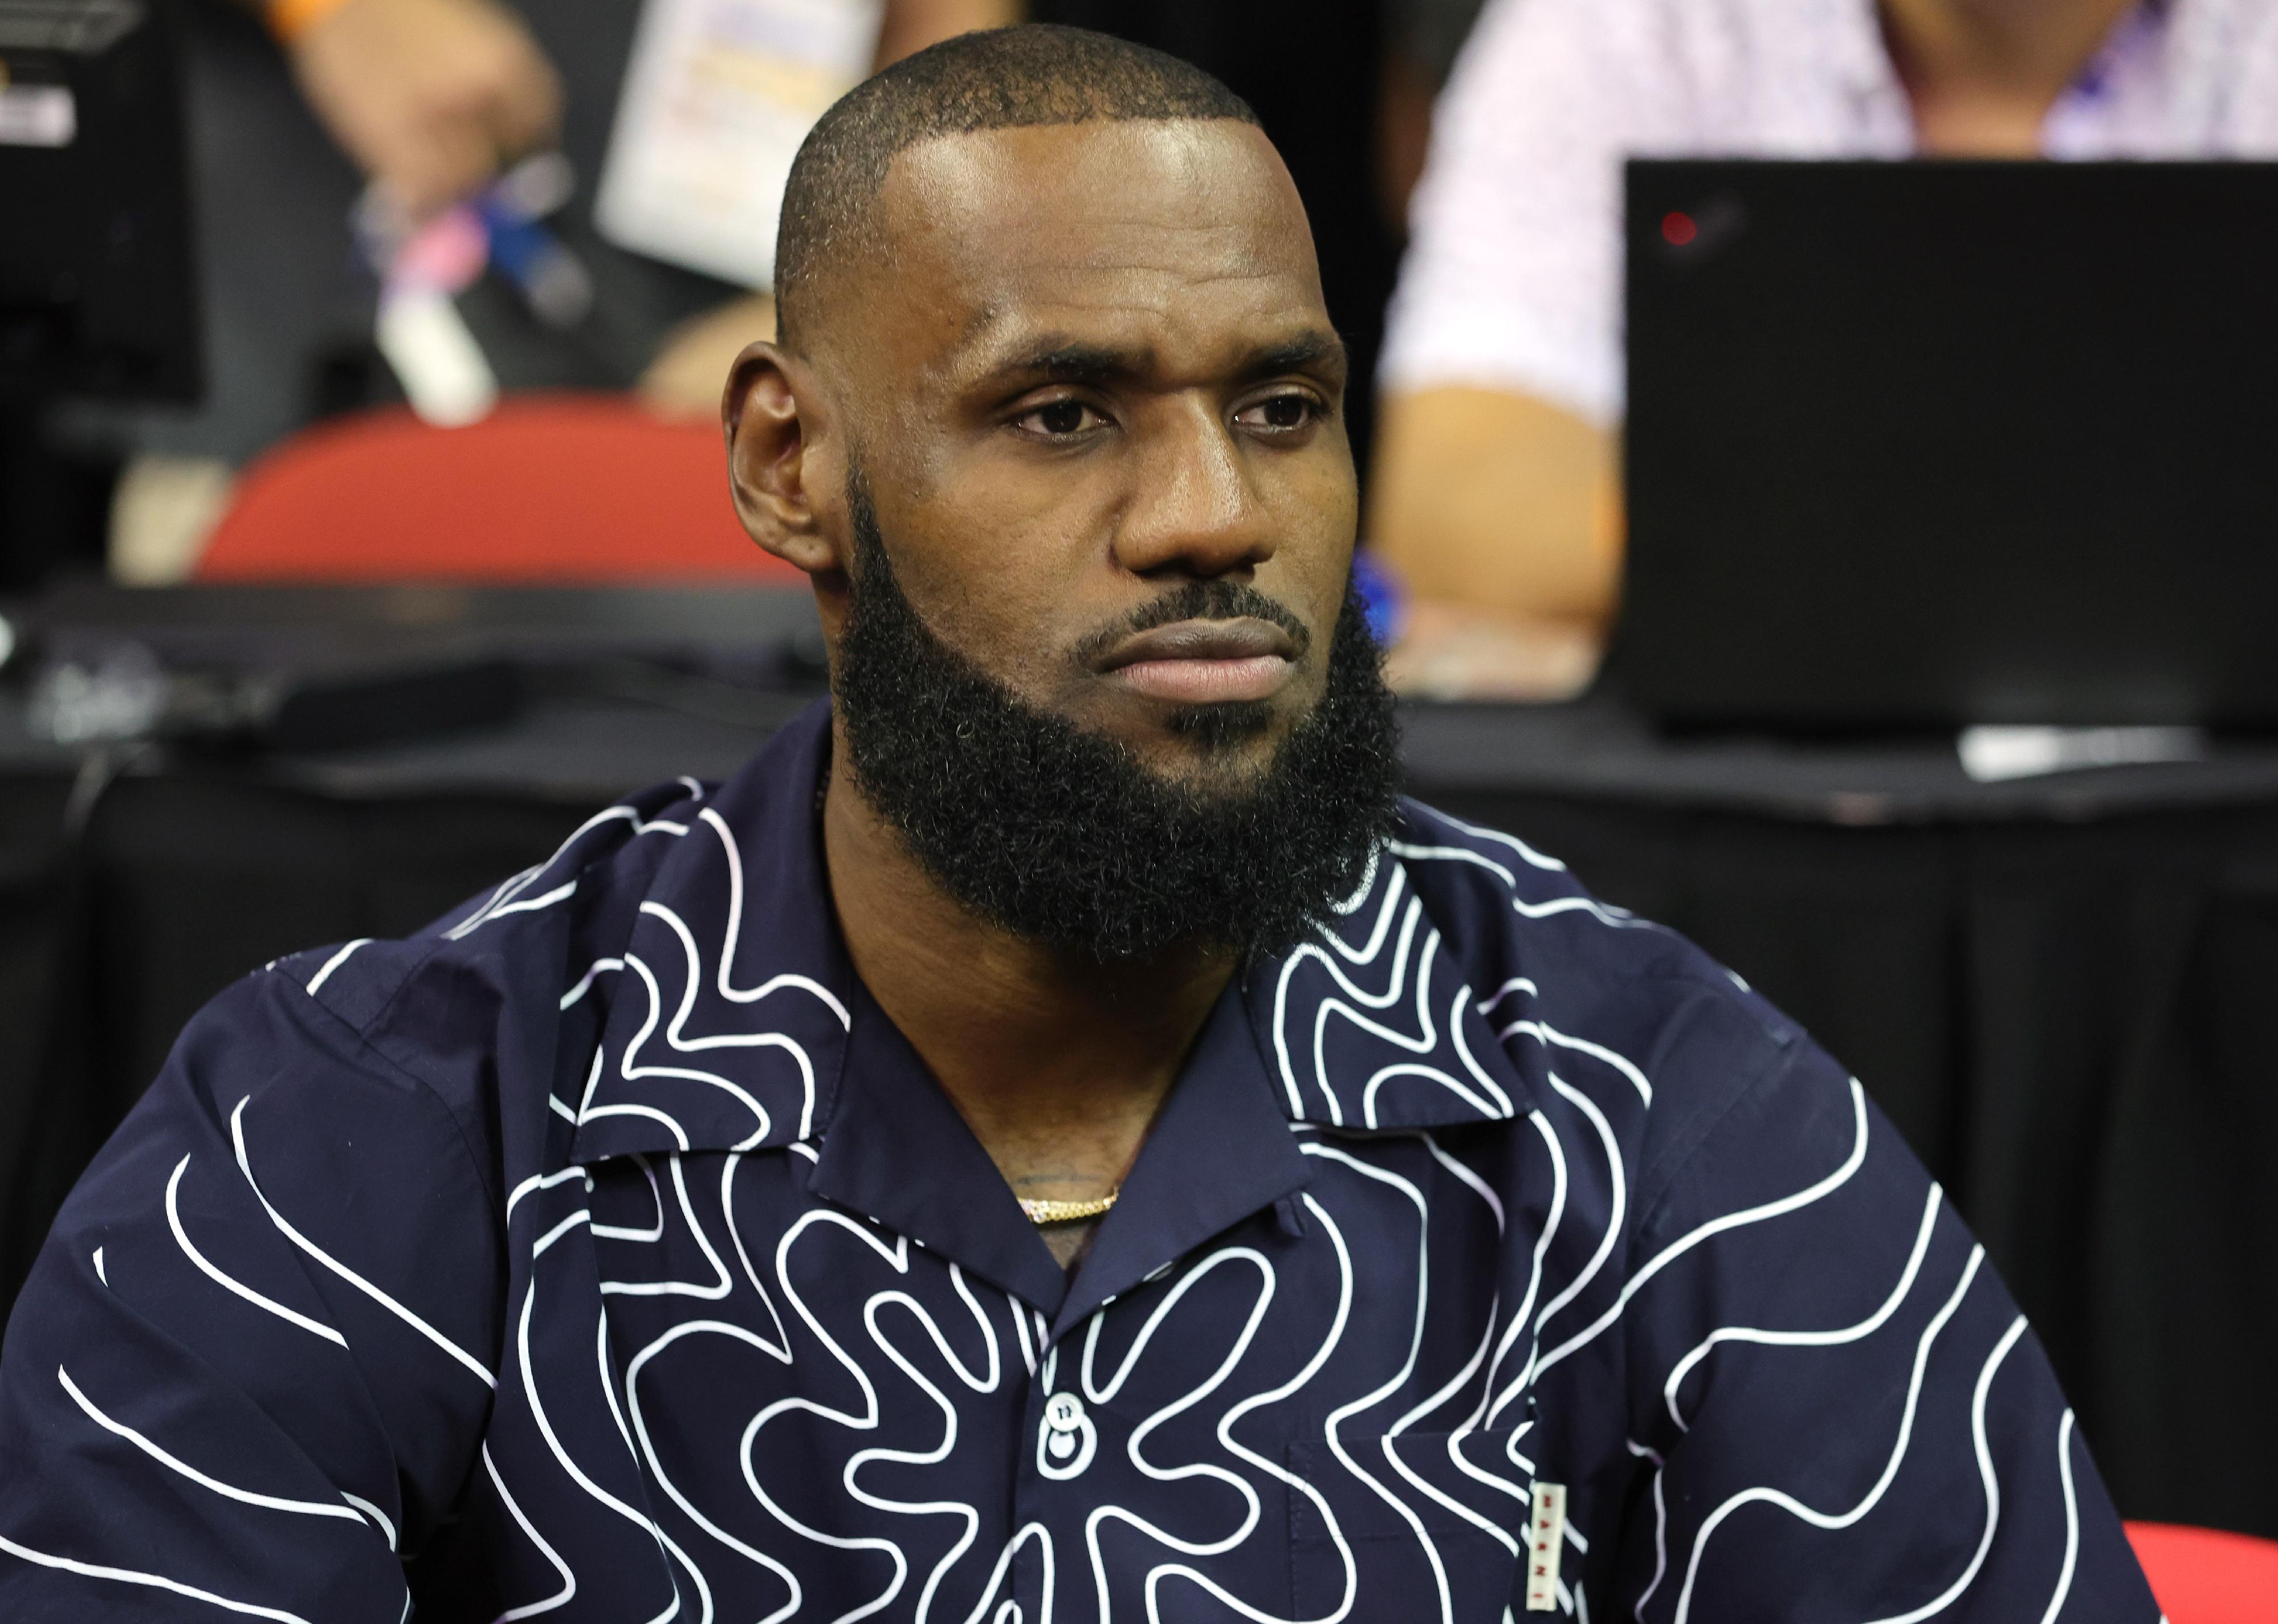 LeBron James in a blue and white shirt.